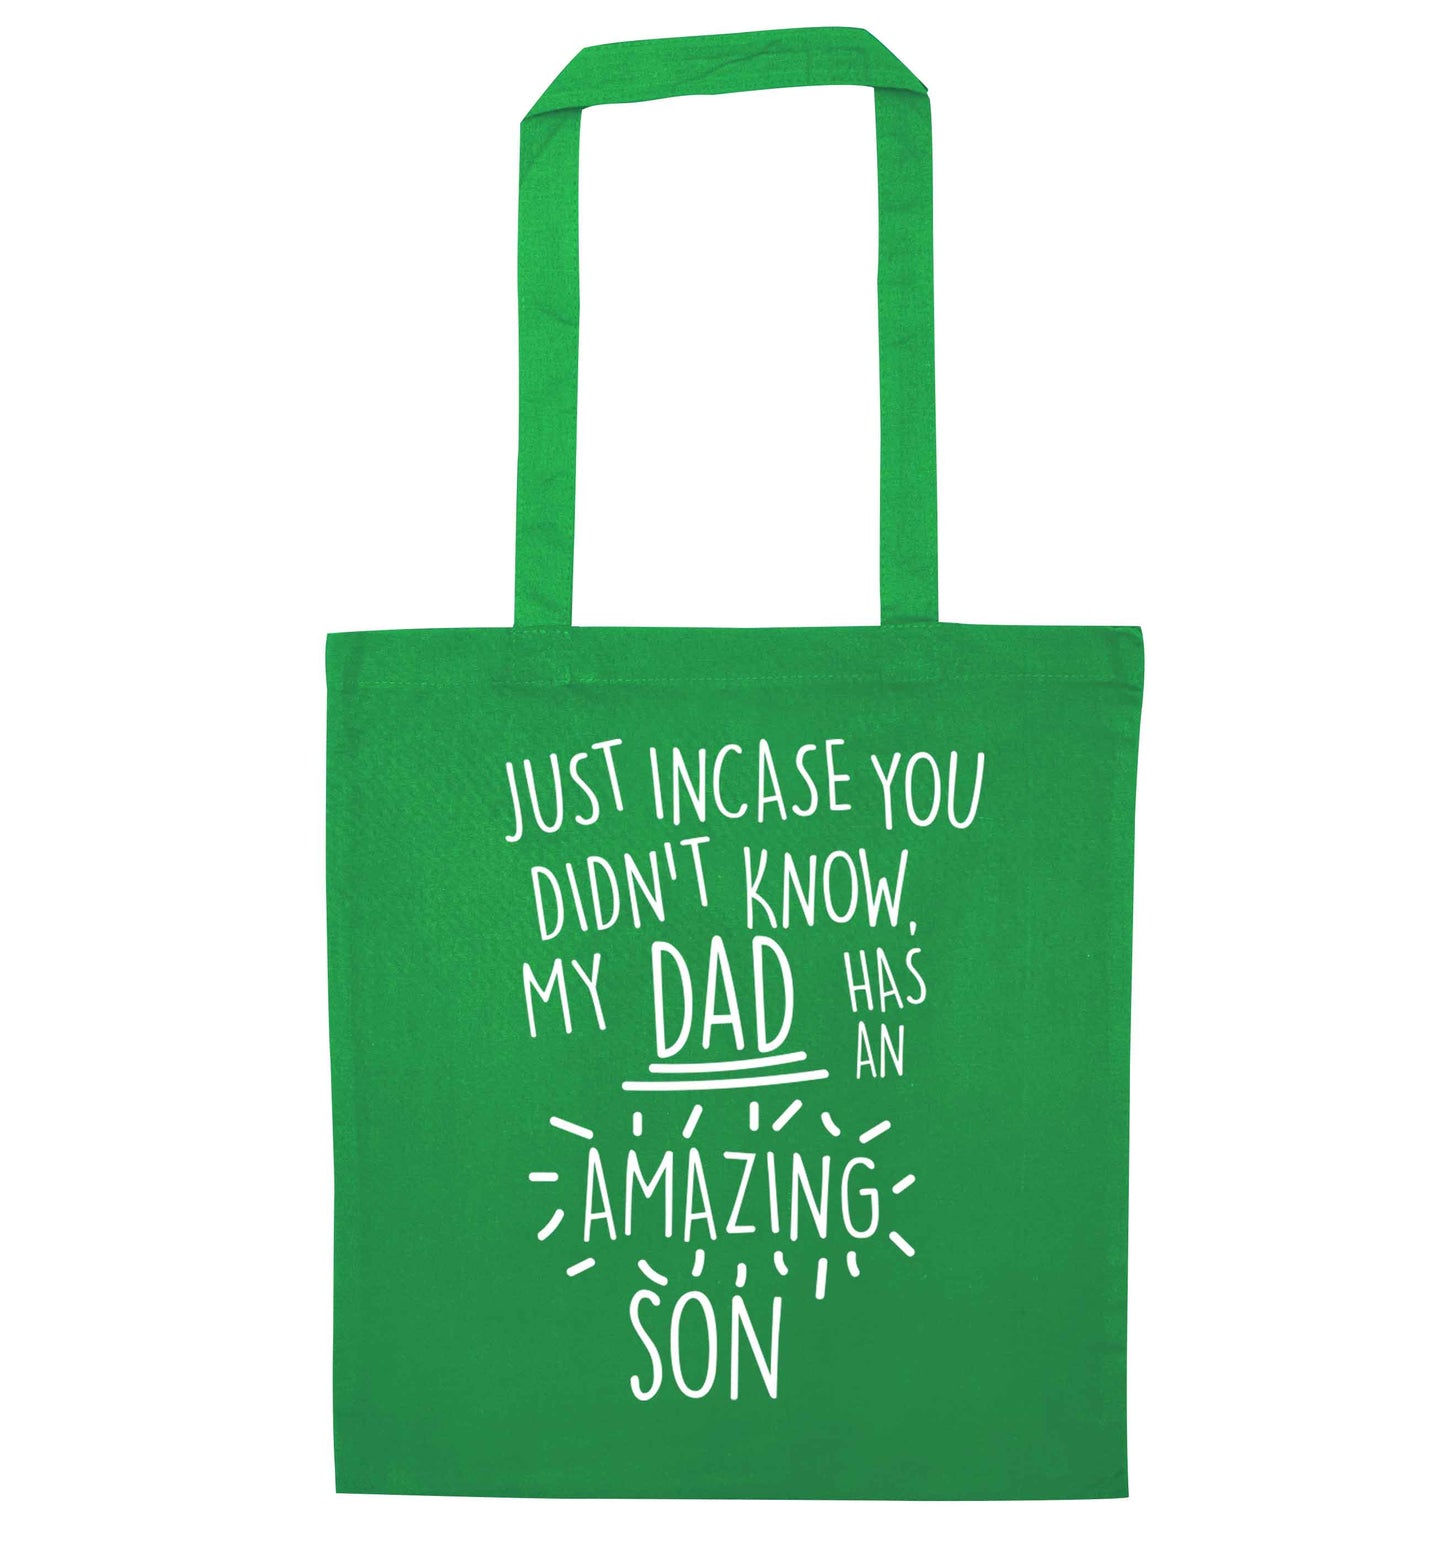 Just incase you didn't know my dad has an amazing son green tote bag